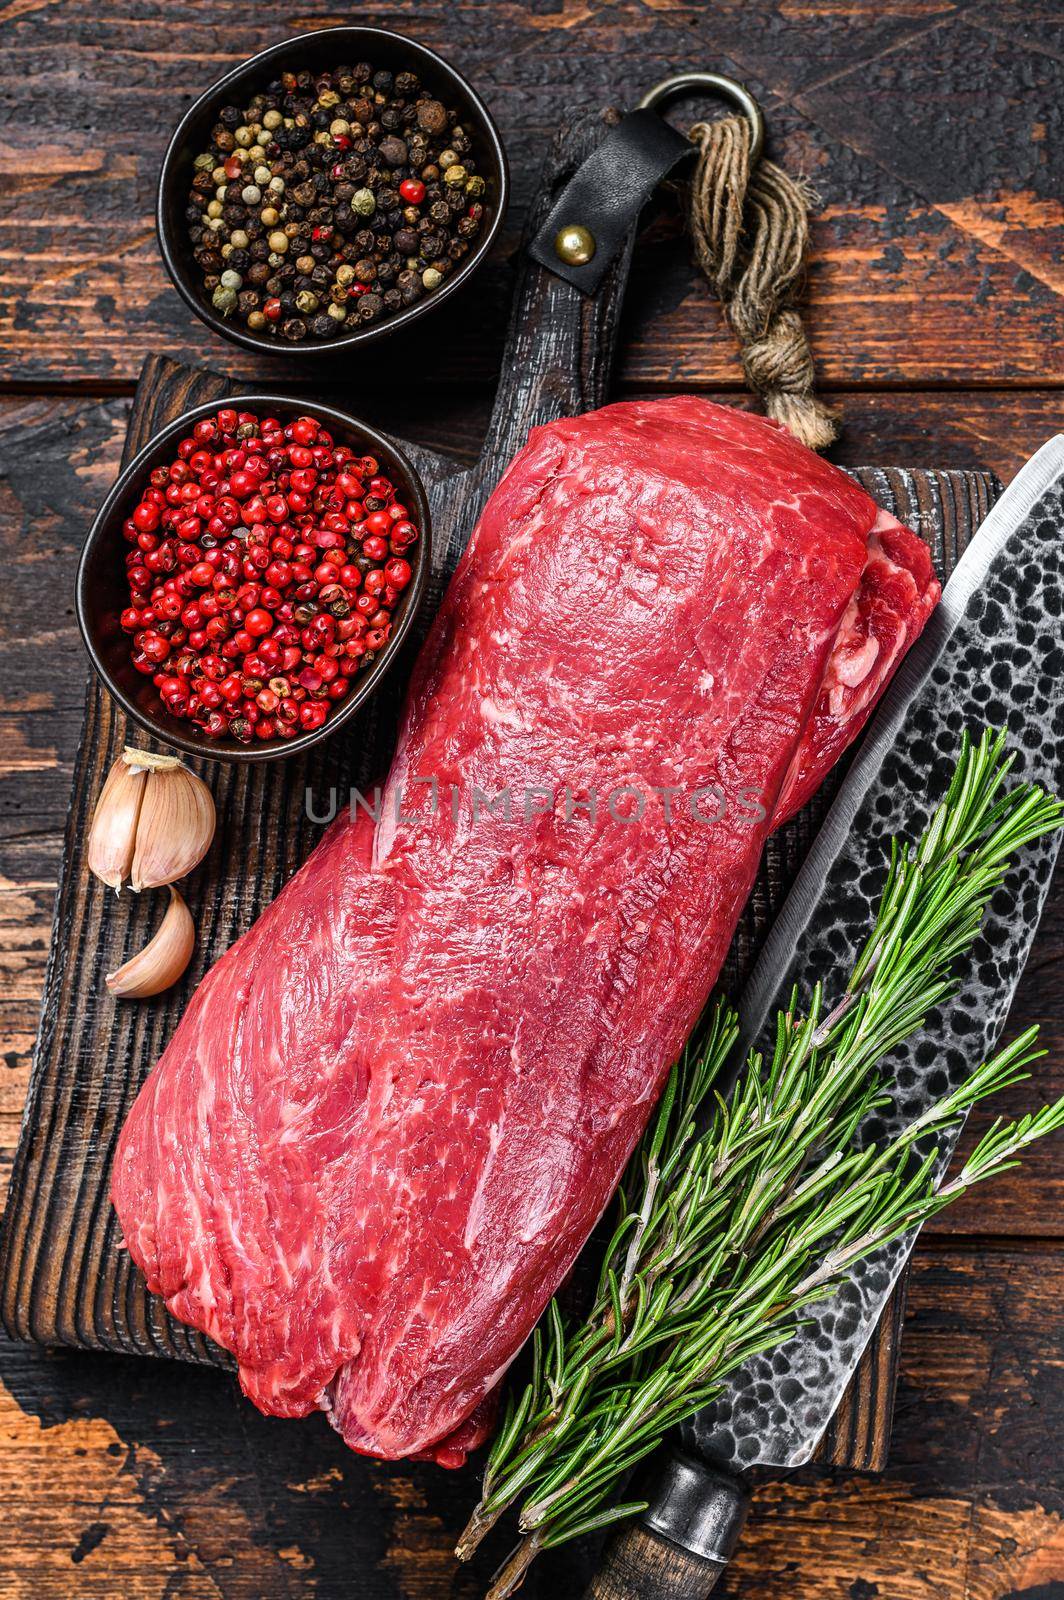 Whole Raw Tenderloin veal meat for steaks fillet mignon on a wooden cutting board with butcher knife. Dark wooden background. Top view.